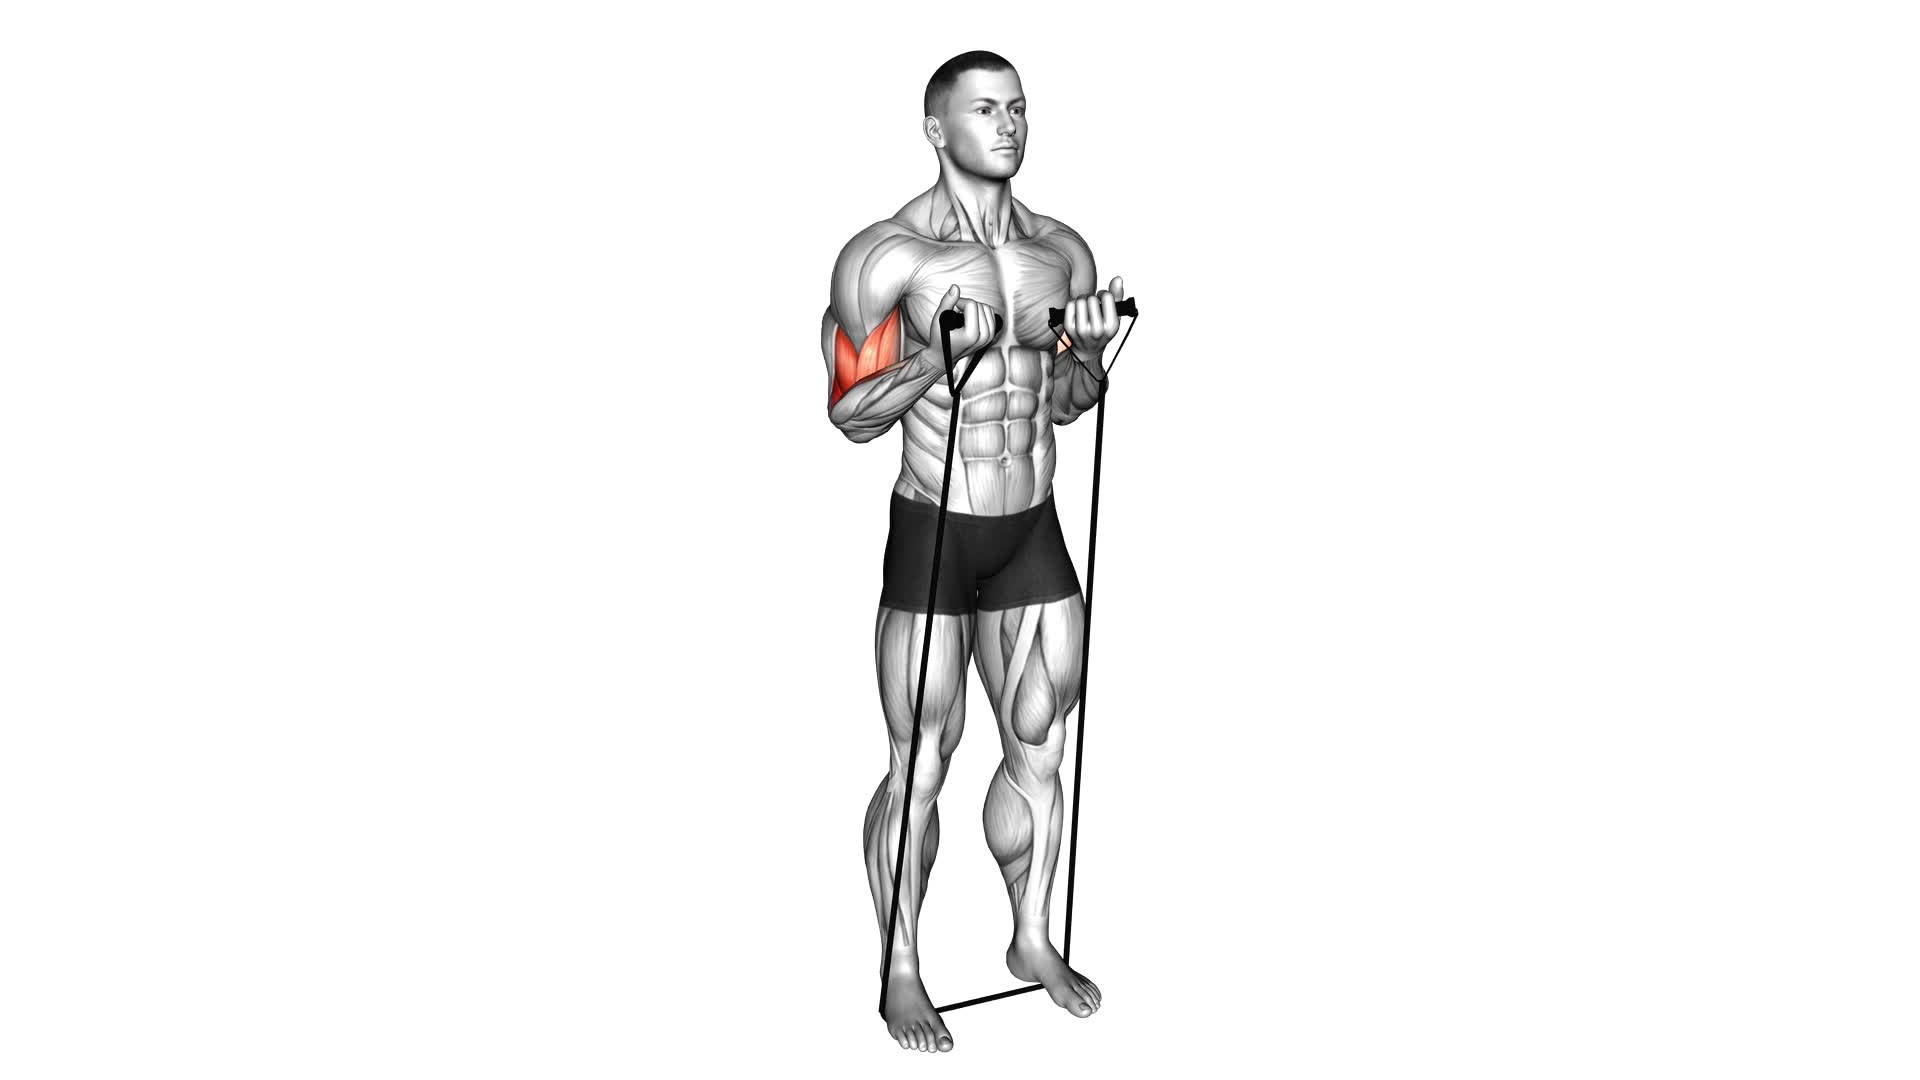 Band Close-Grip Biceps Curl - Video Exercise Guide & Tips